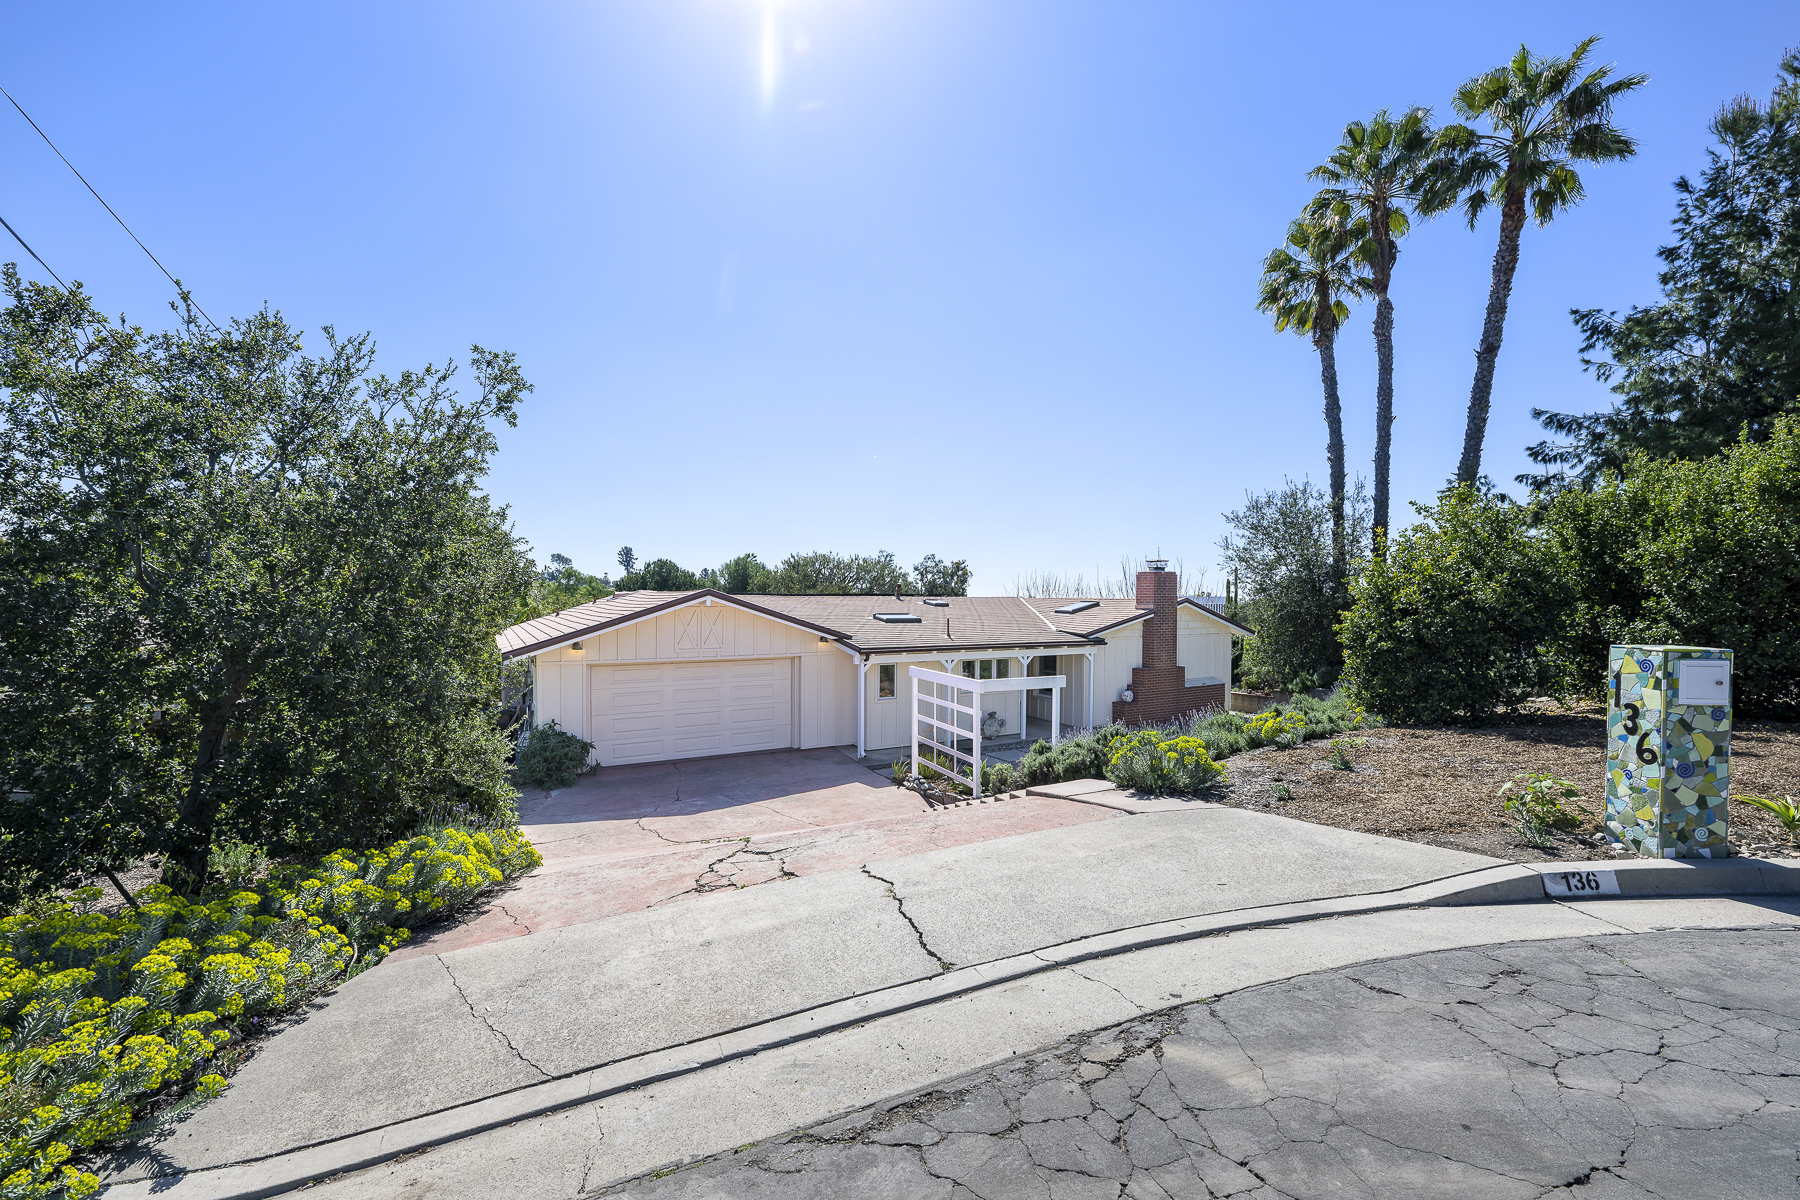 136 Avalon Dr, Fullerton, CA 92835-Street View Elevated 2